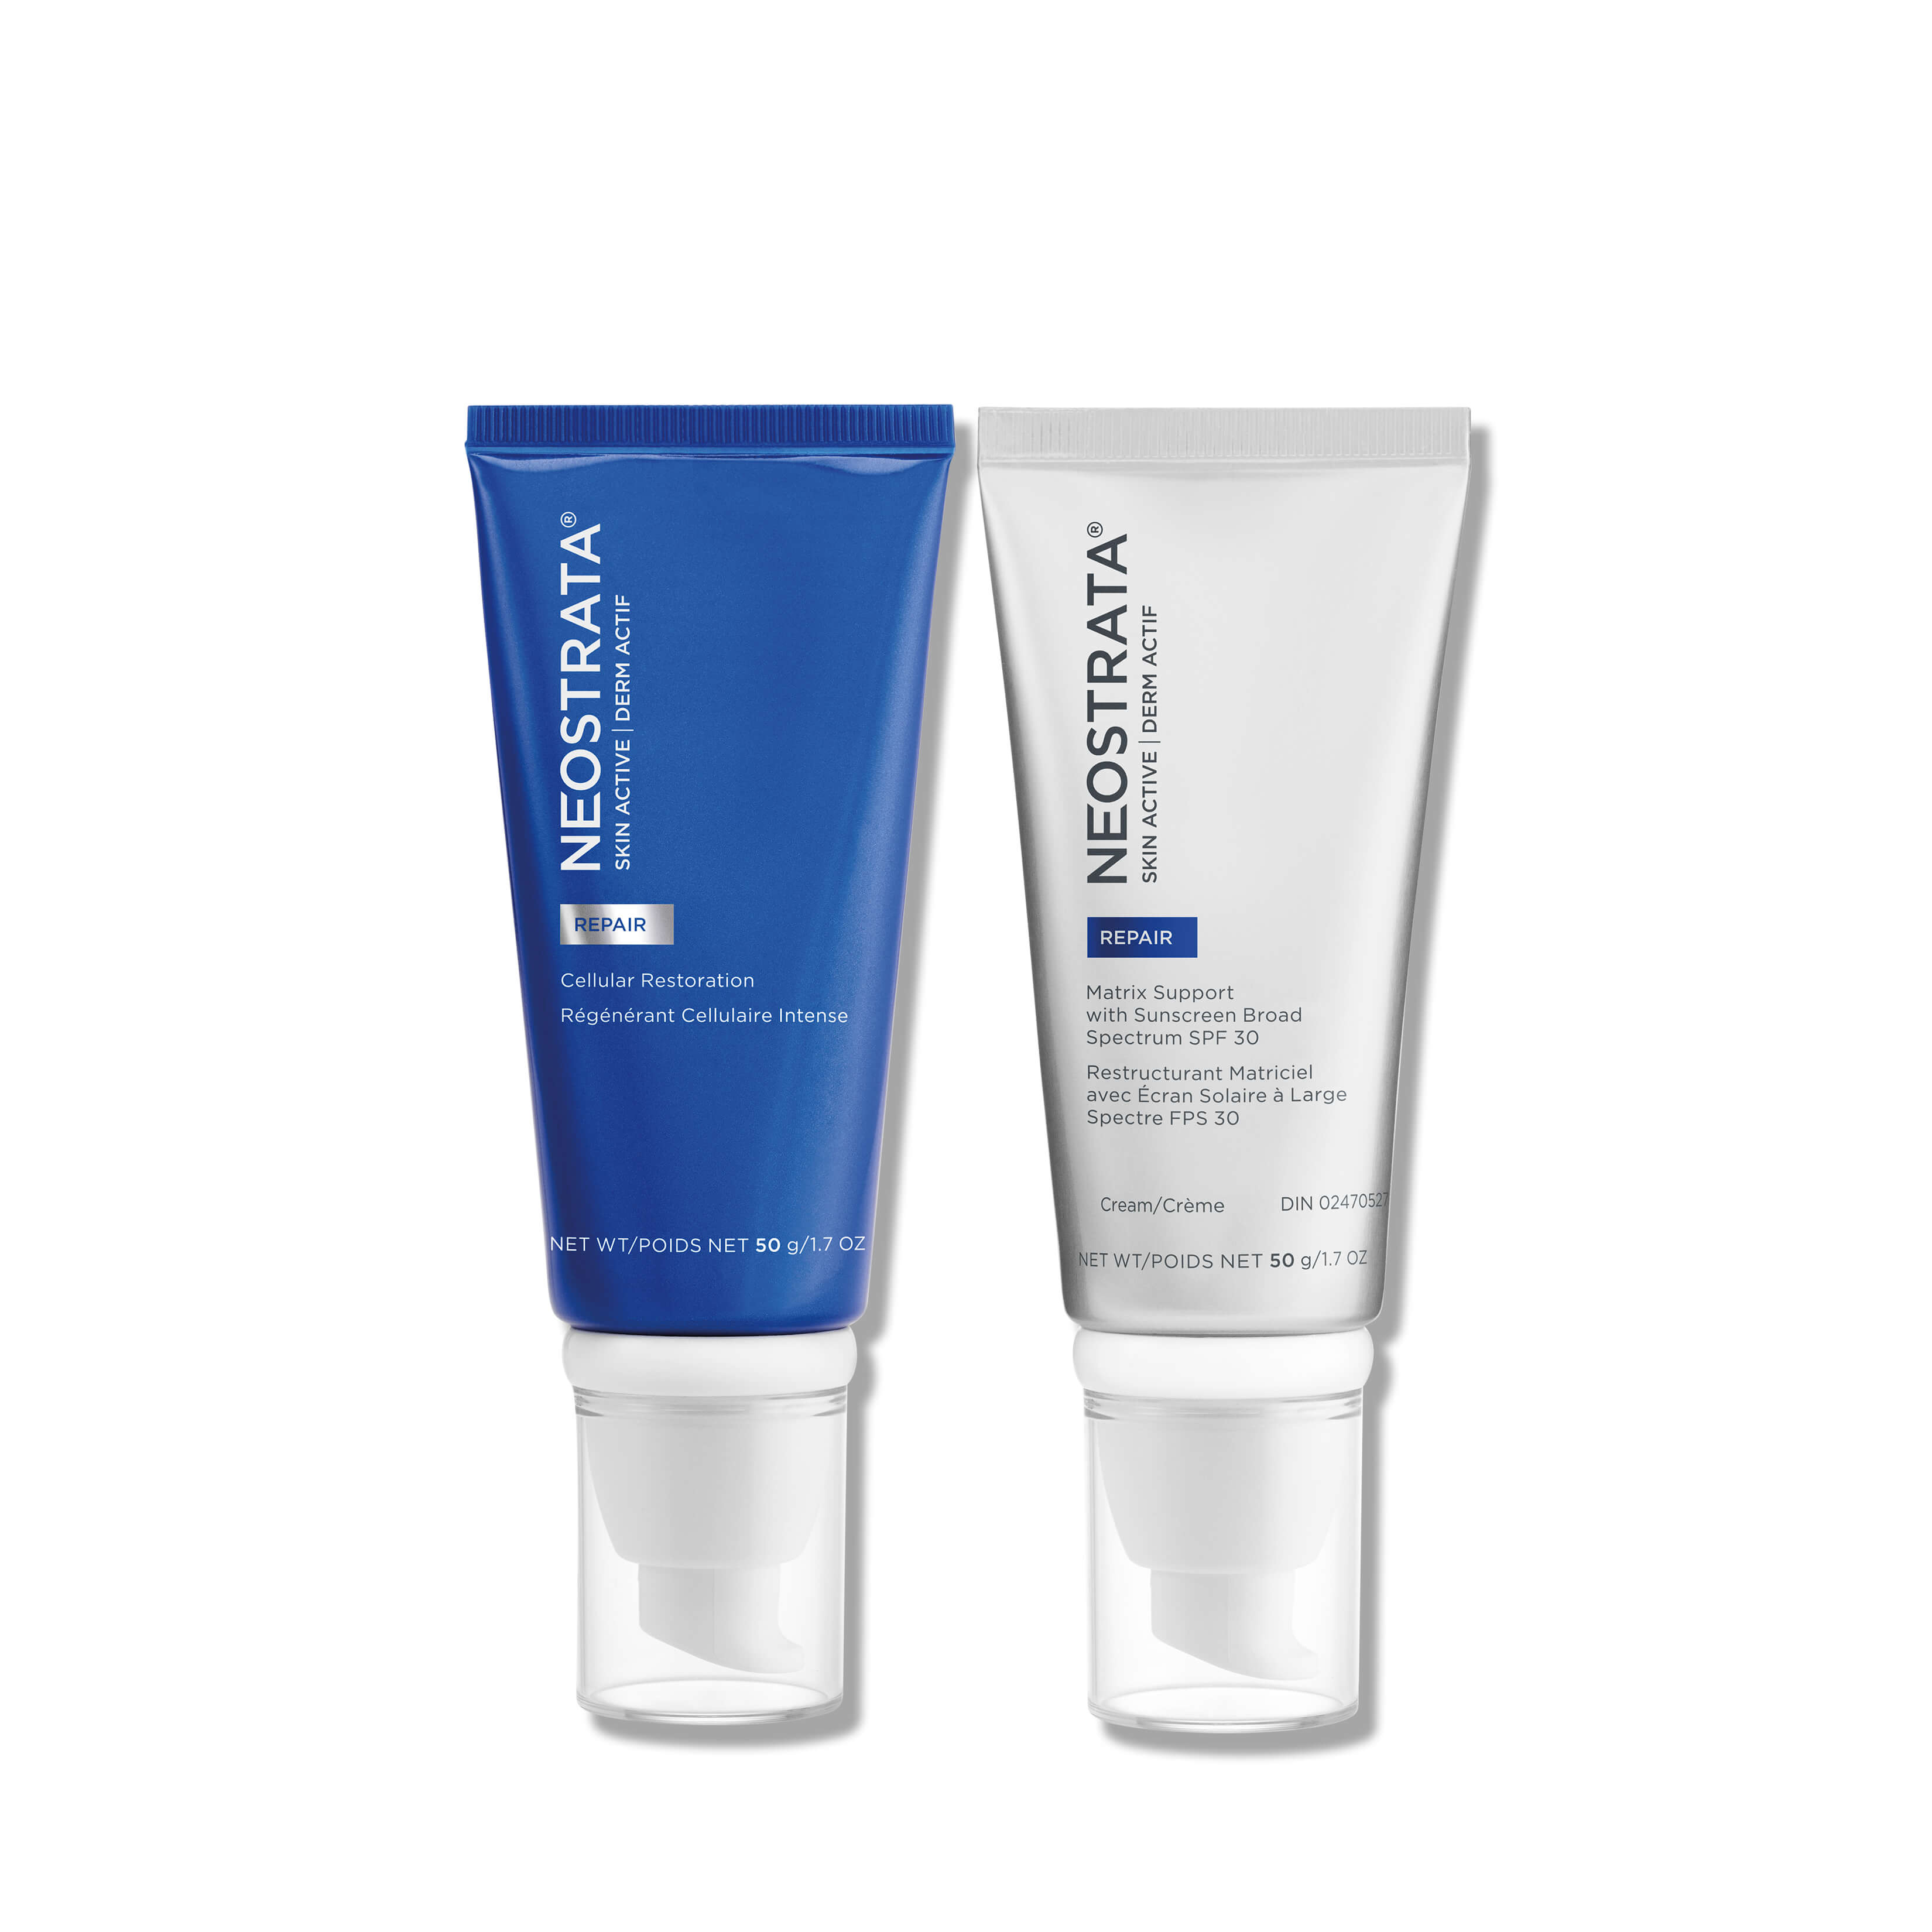 NeoStrata SKIN ACTIVE Day & Night Duo | Get Visible Antiaging Results Around The Clock With This Duo Of Bestsellers To Help Protect Your Skin From The